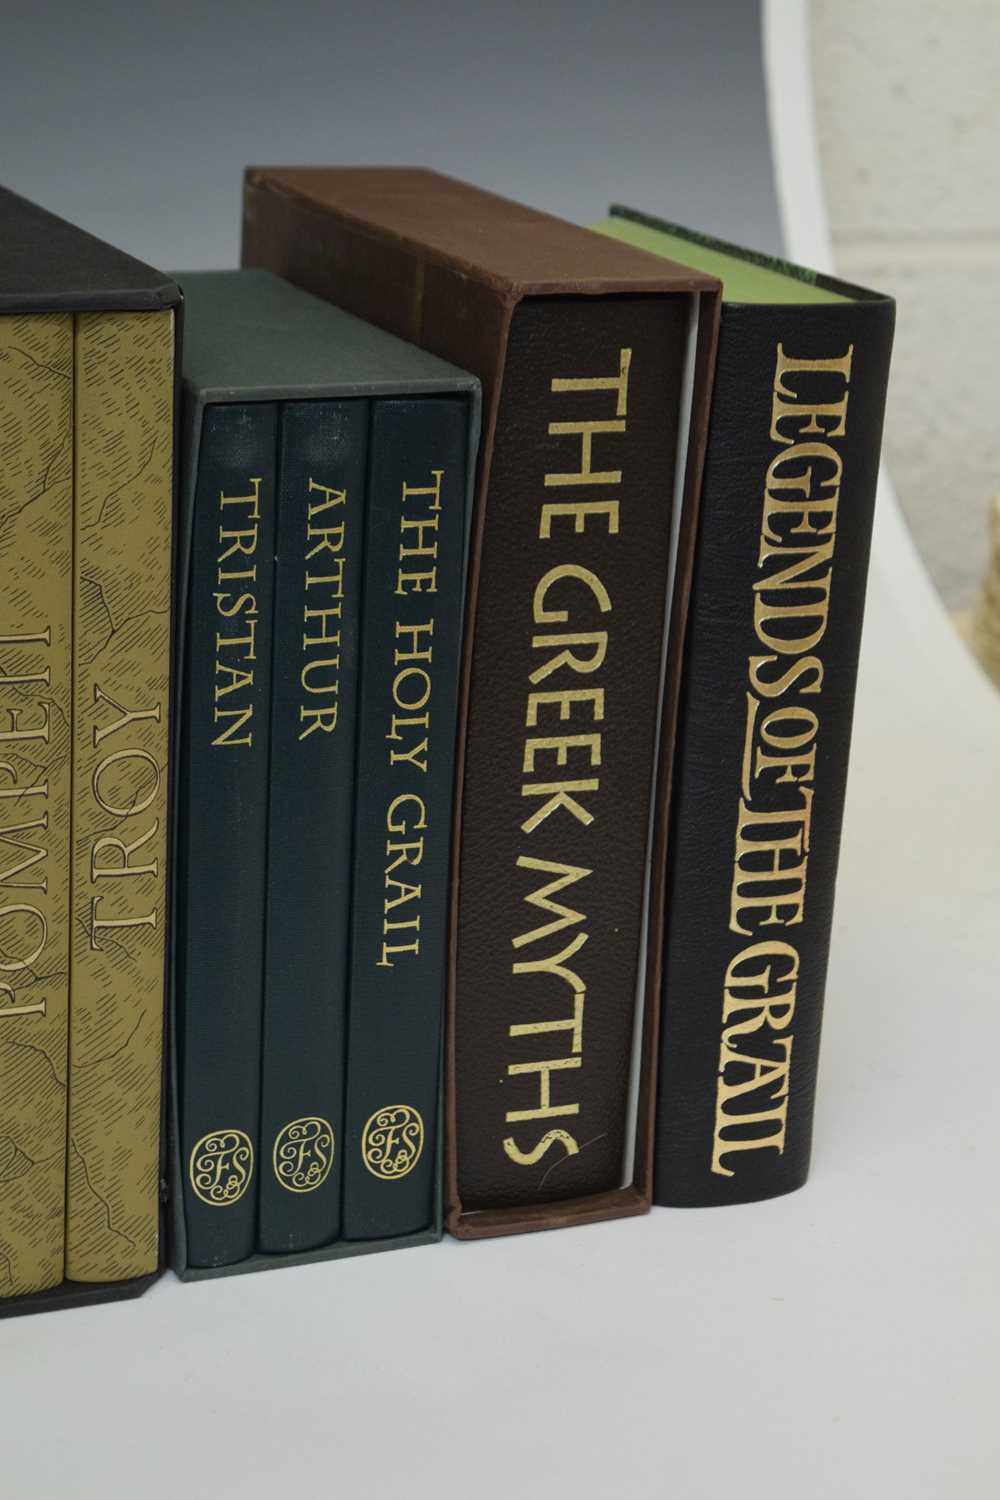 Collection of Folio Society volumes - Legends and Myths, etc - Image 5 of 5